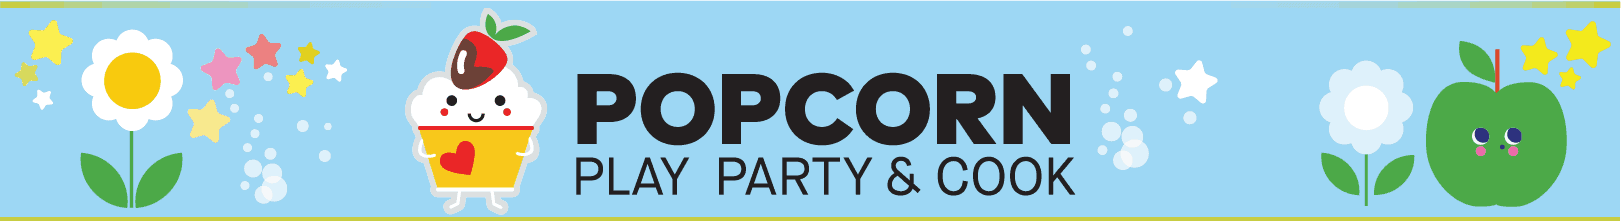 Popcorn: play, party and cook